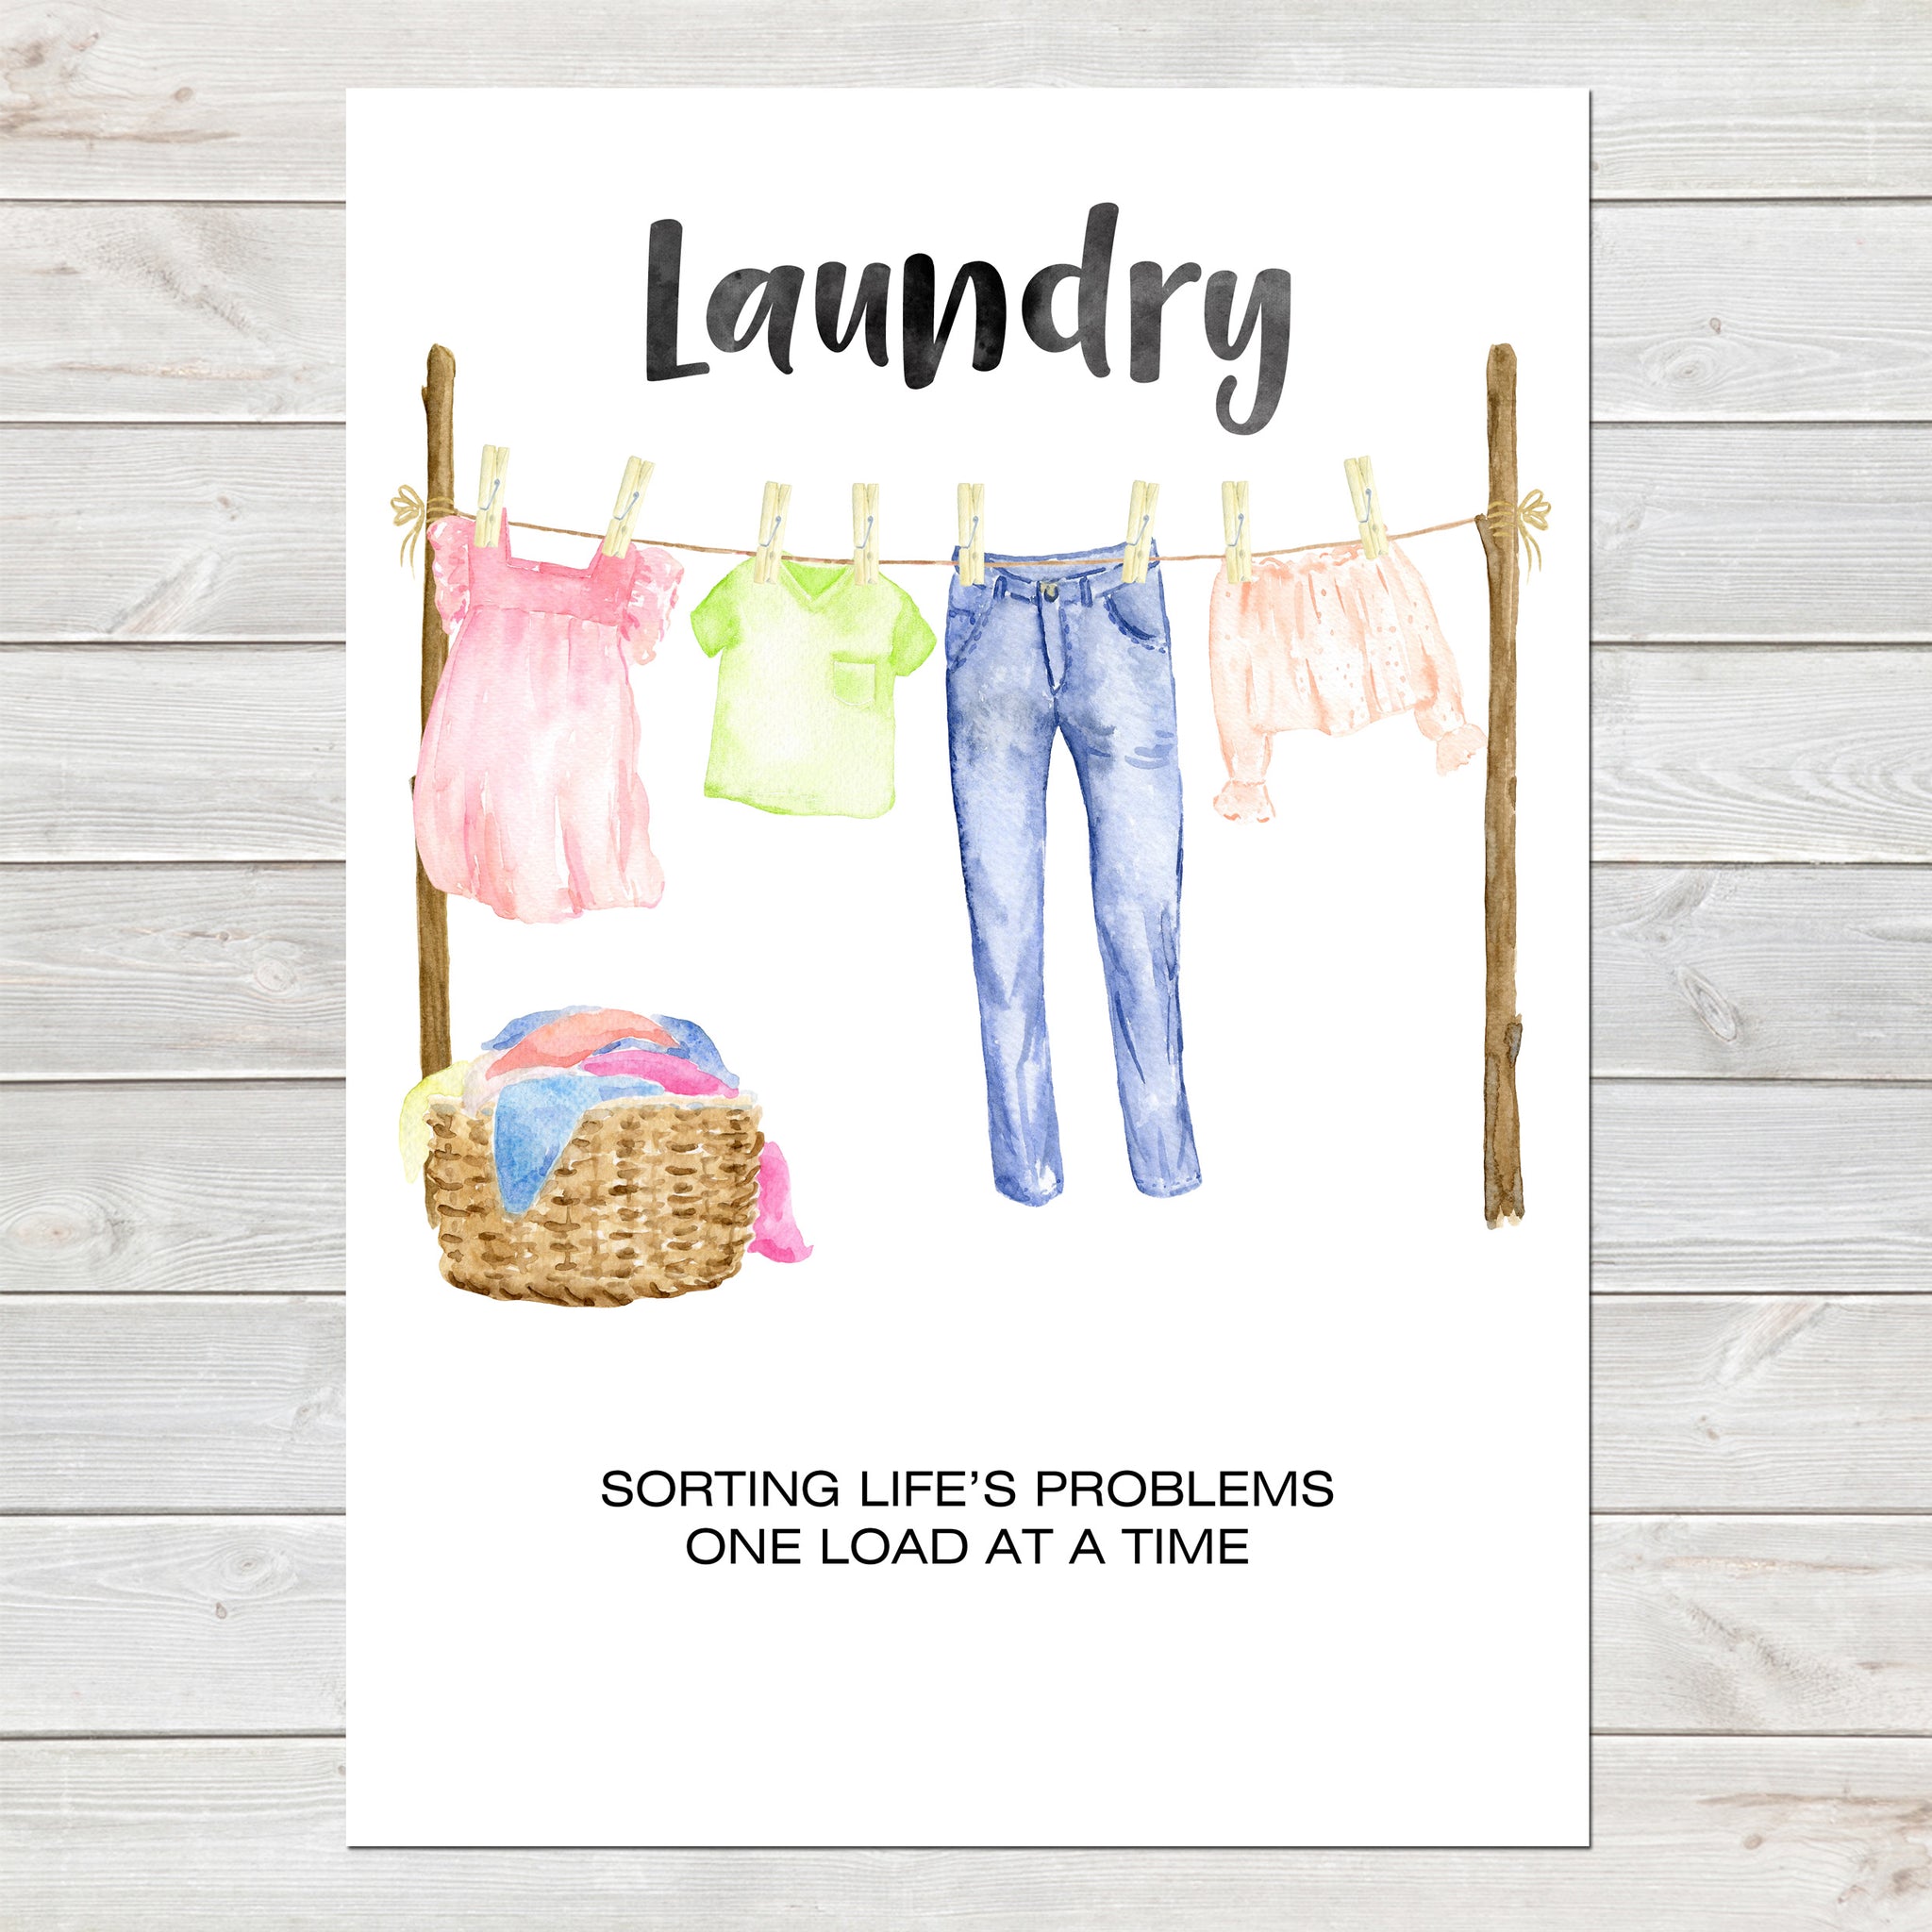 Kitchen Laundry Print, Washing Line Funny Wall Art Mother's Day Gift